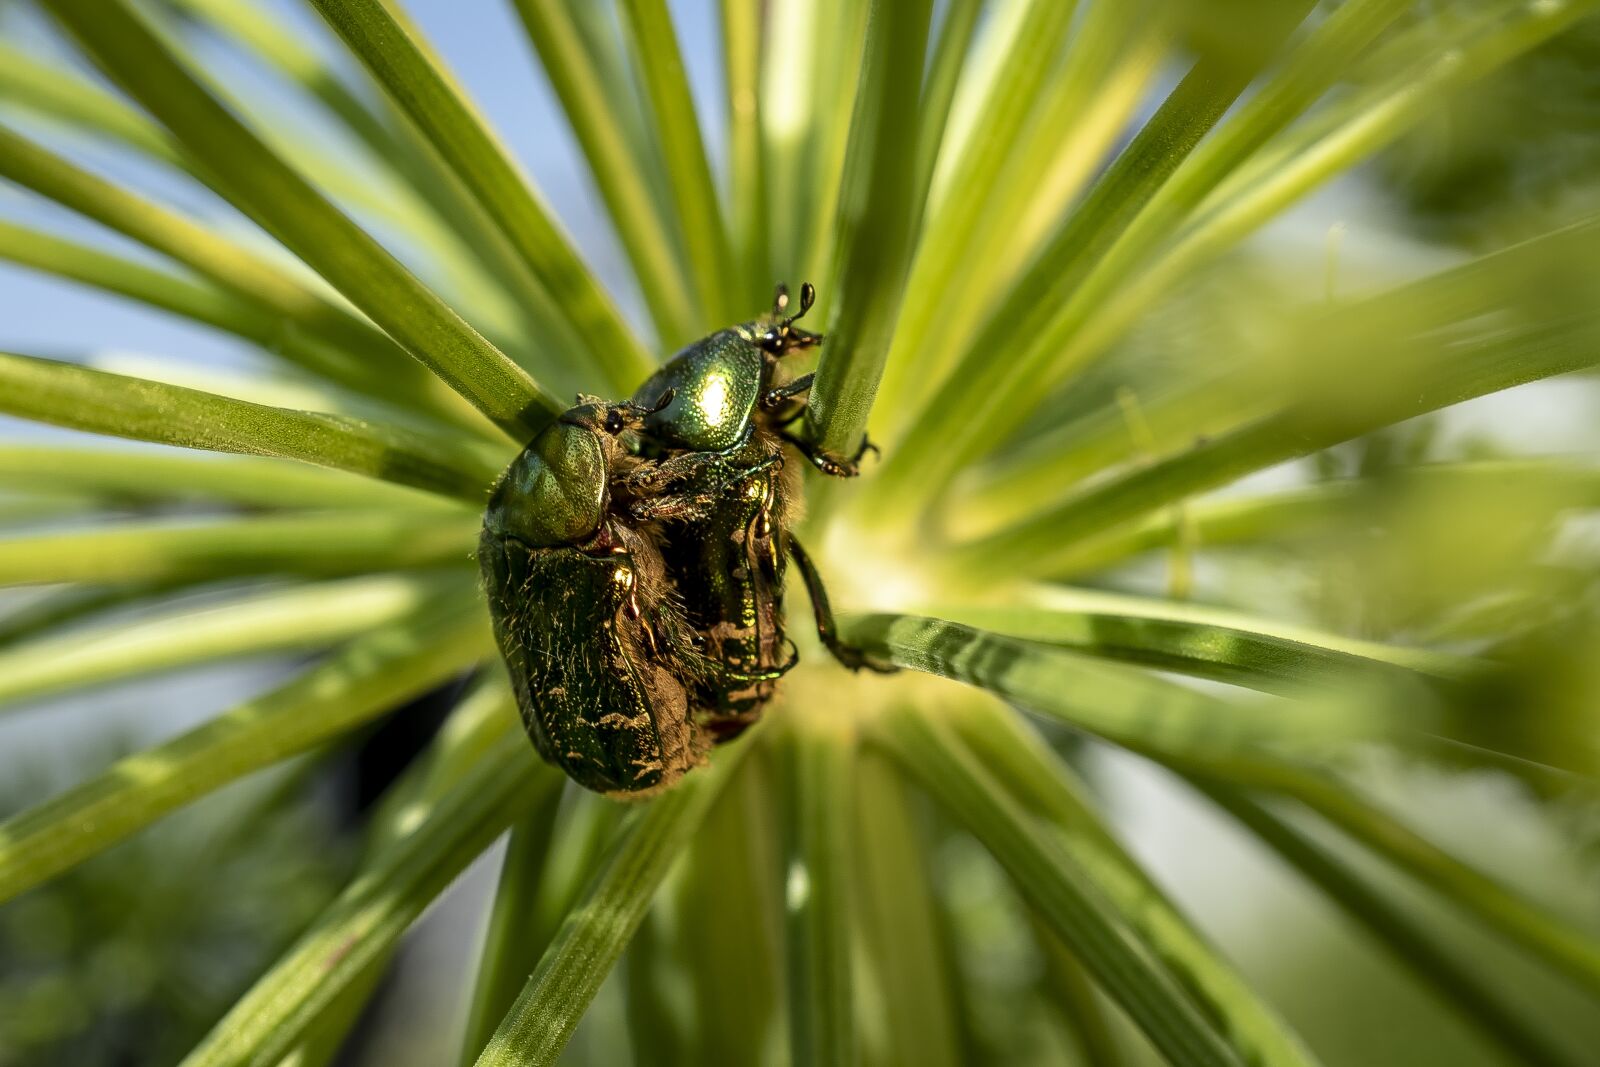 Sony a7 II sample photo. Beetle, insect, plant photography